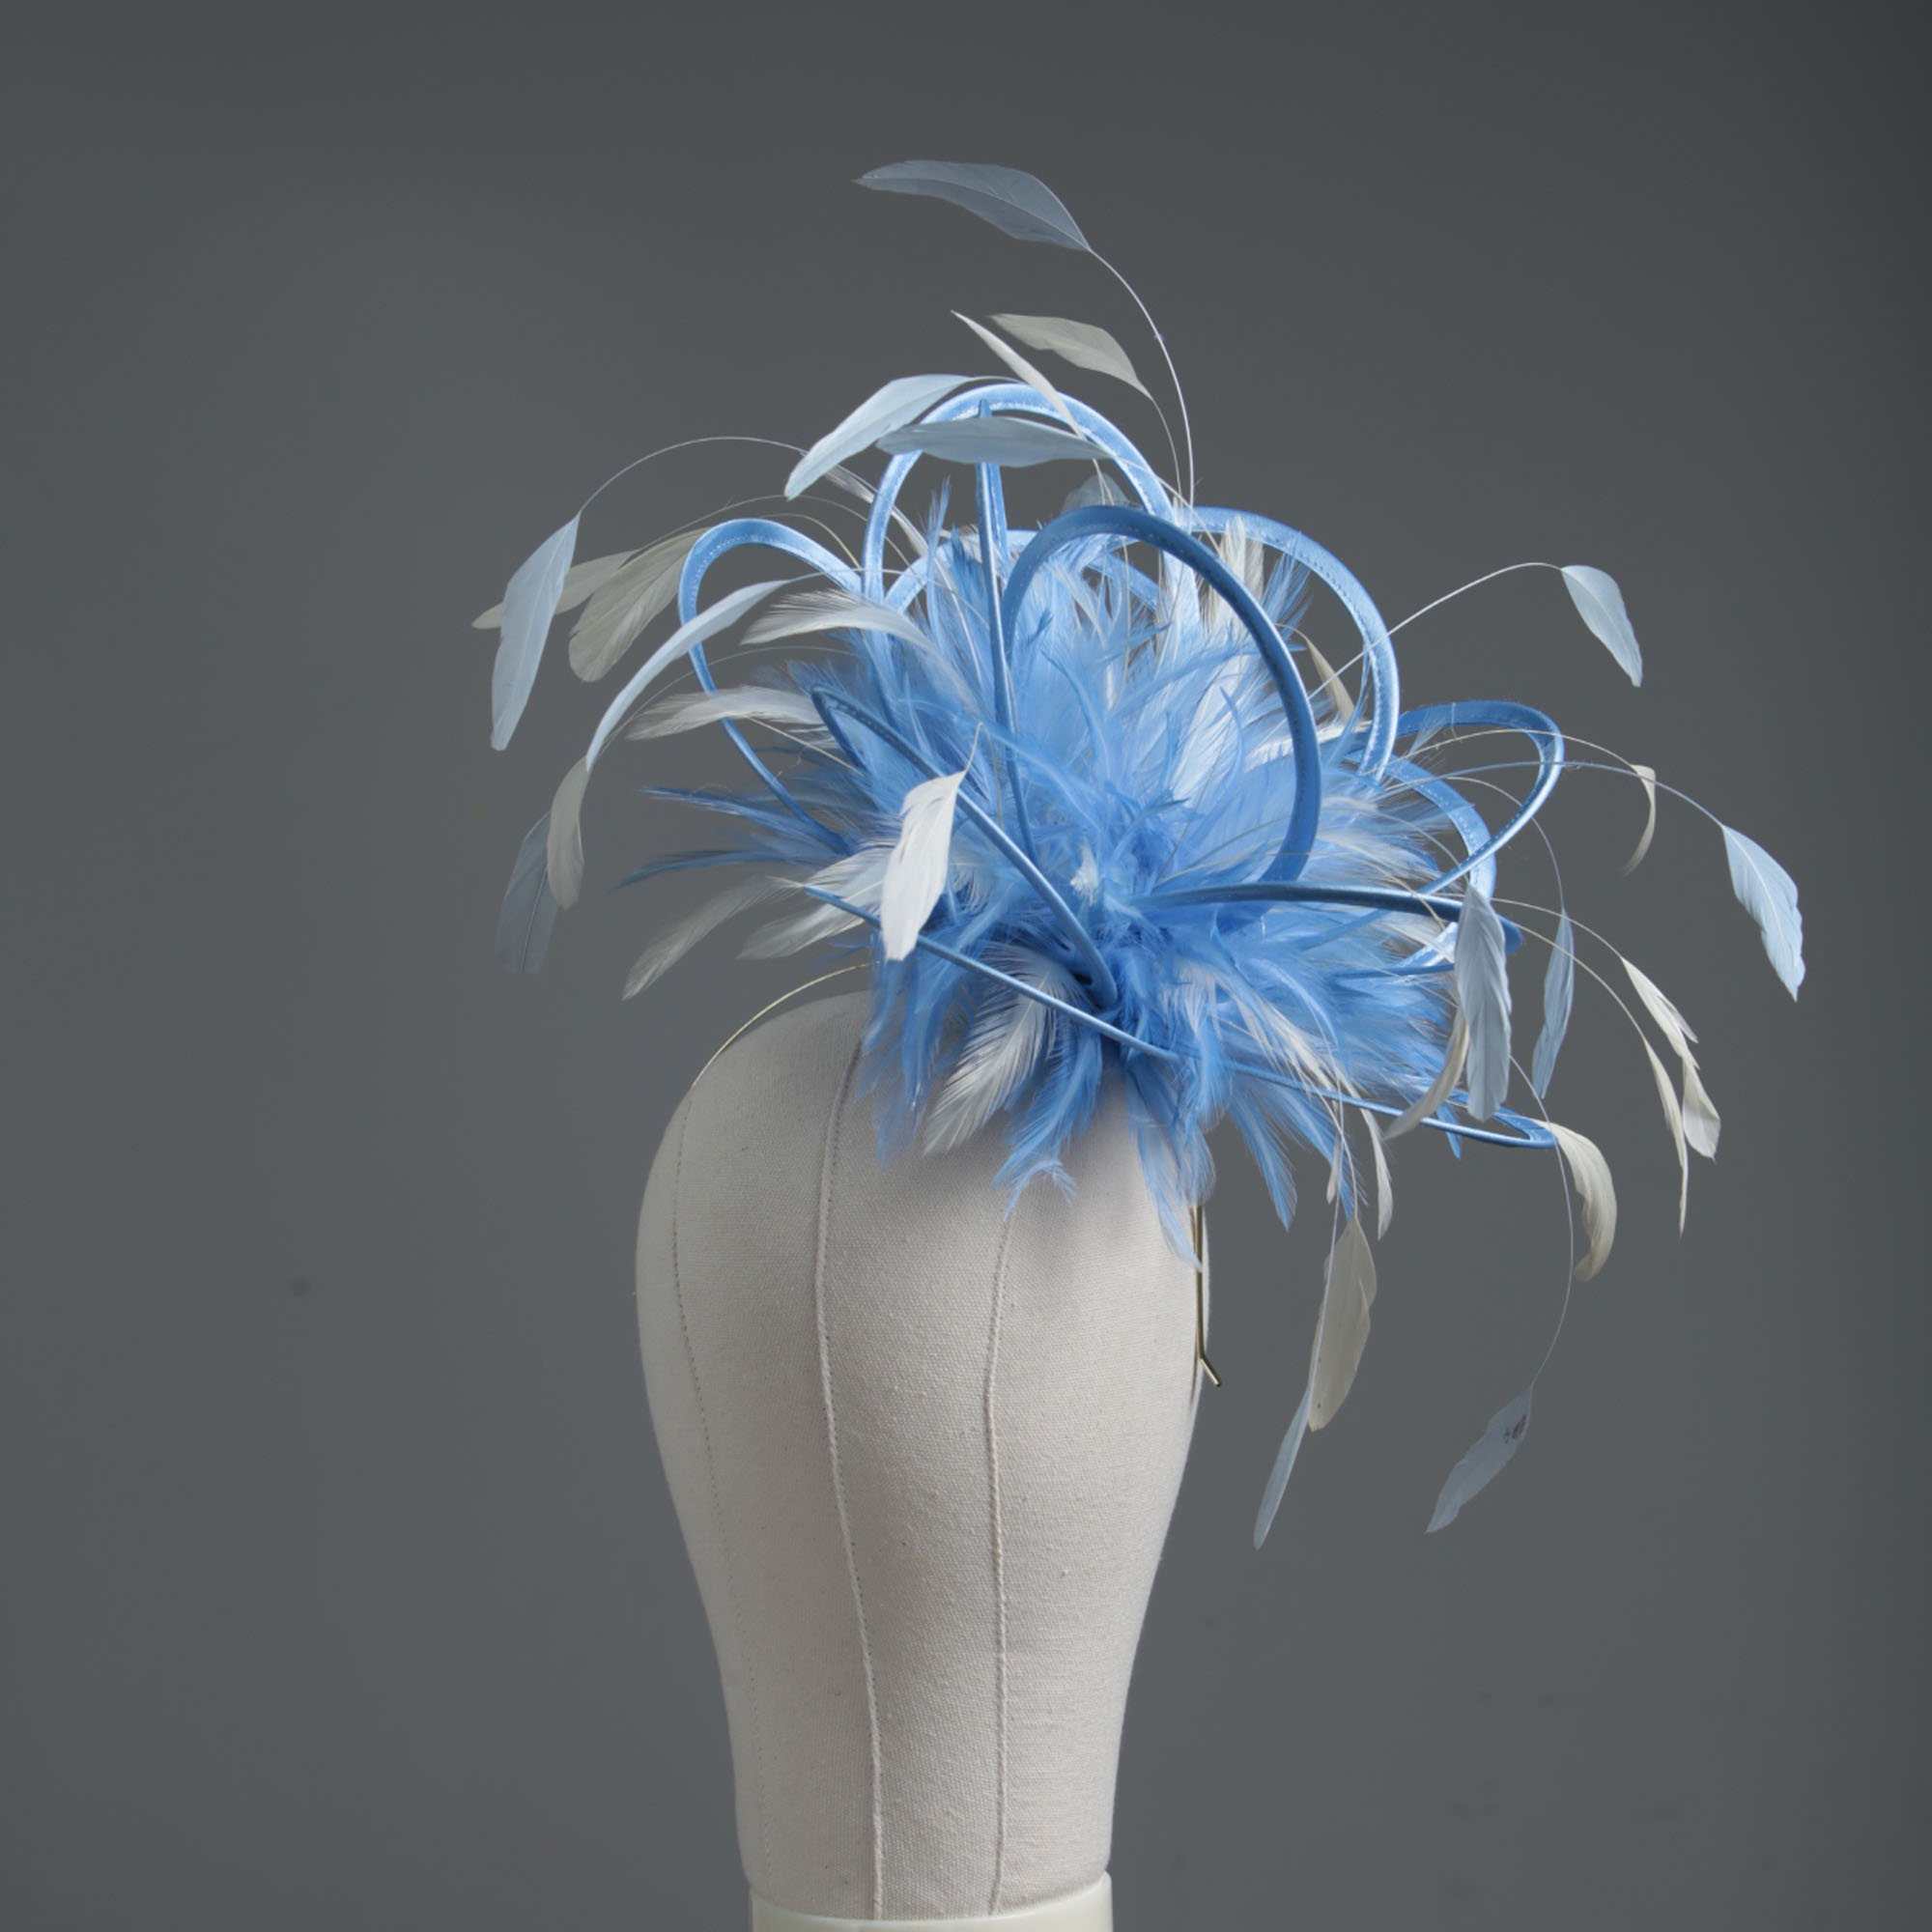 Ladies formal cornflower blue and ivory medium feather and satin loop fascinator hat. Suitable for a wedding or ladies day at the races